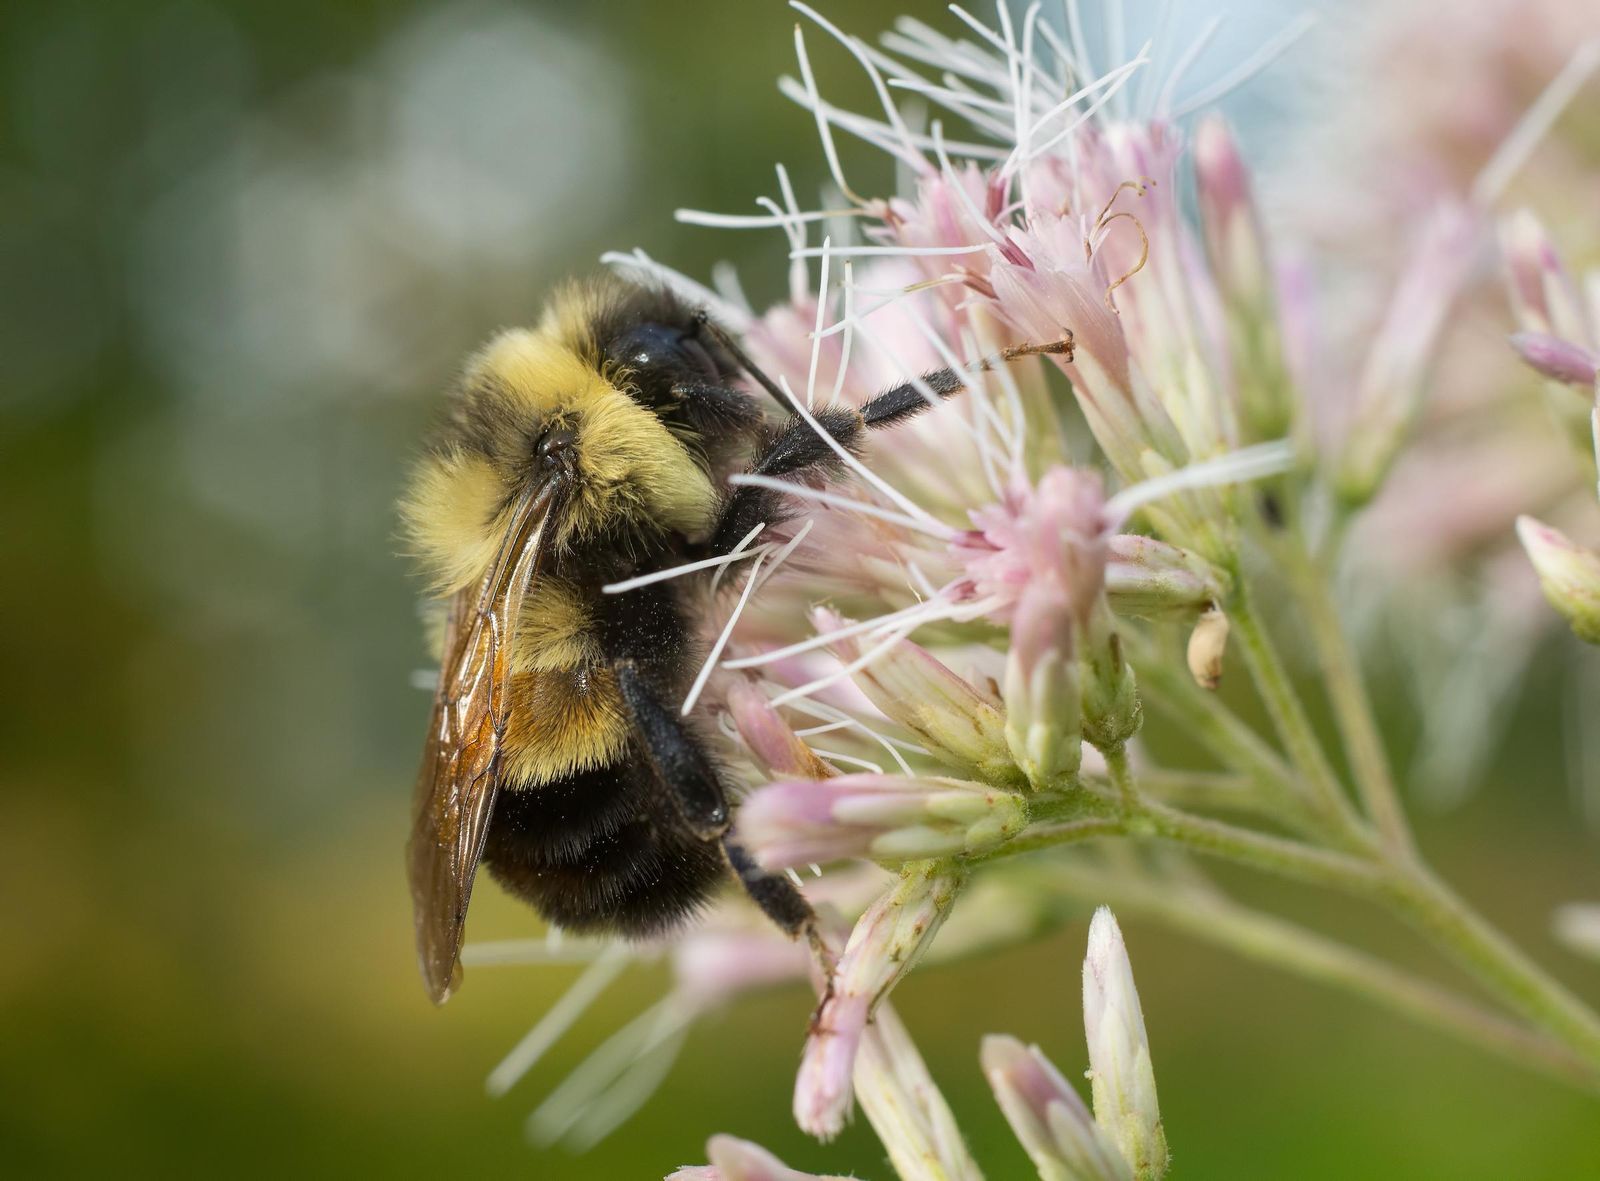 Insect watch: Large earth bumblebee